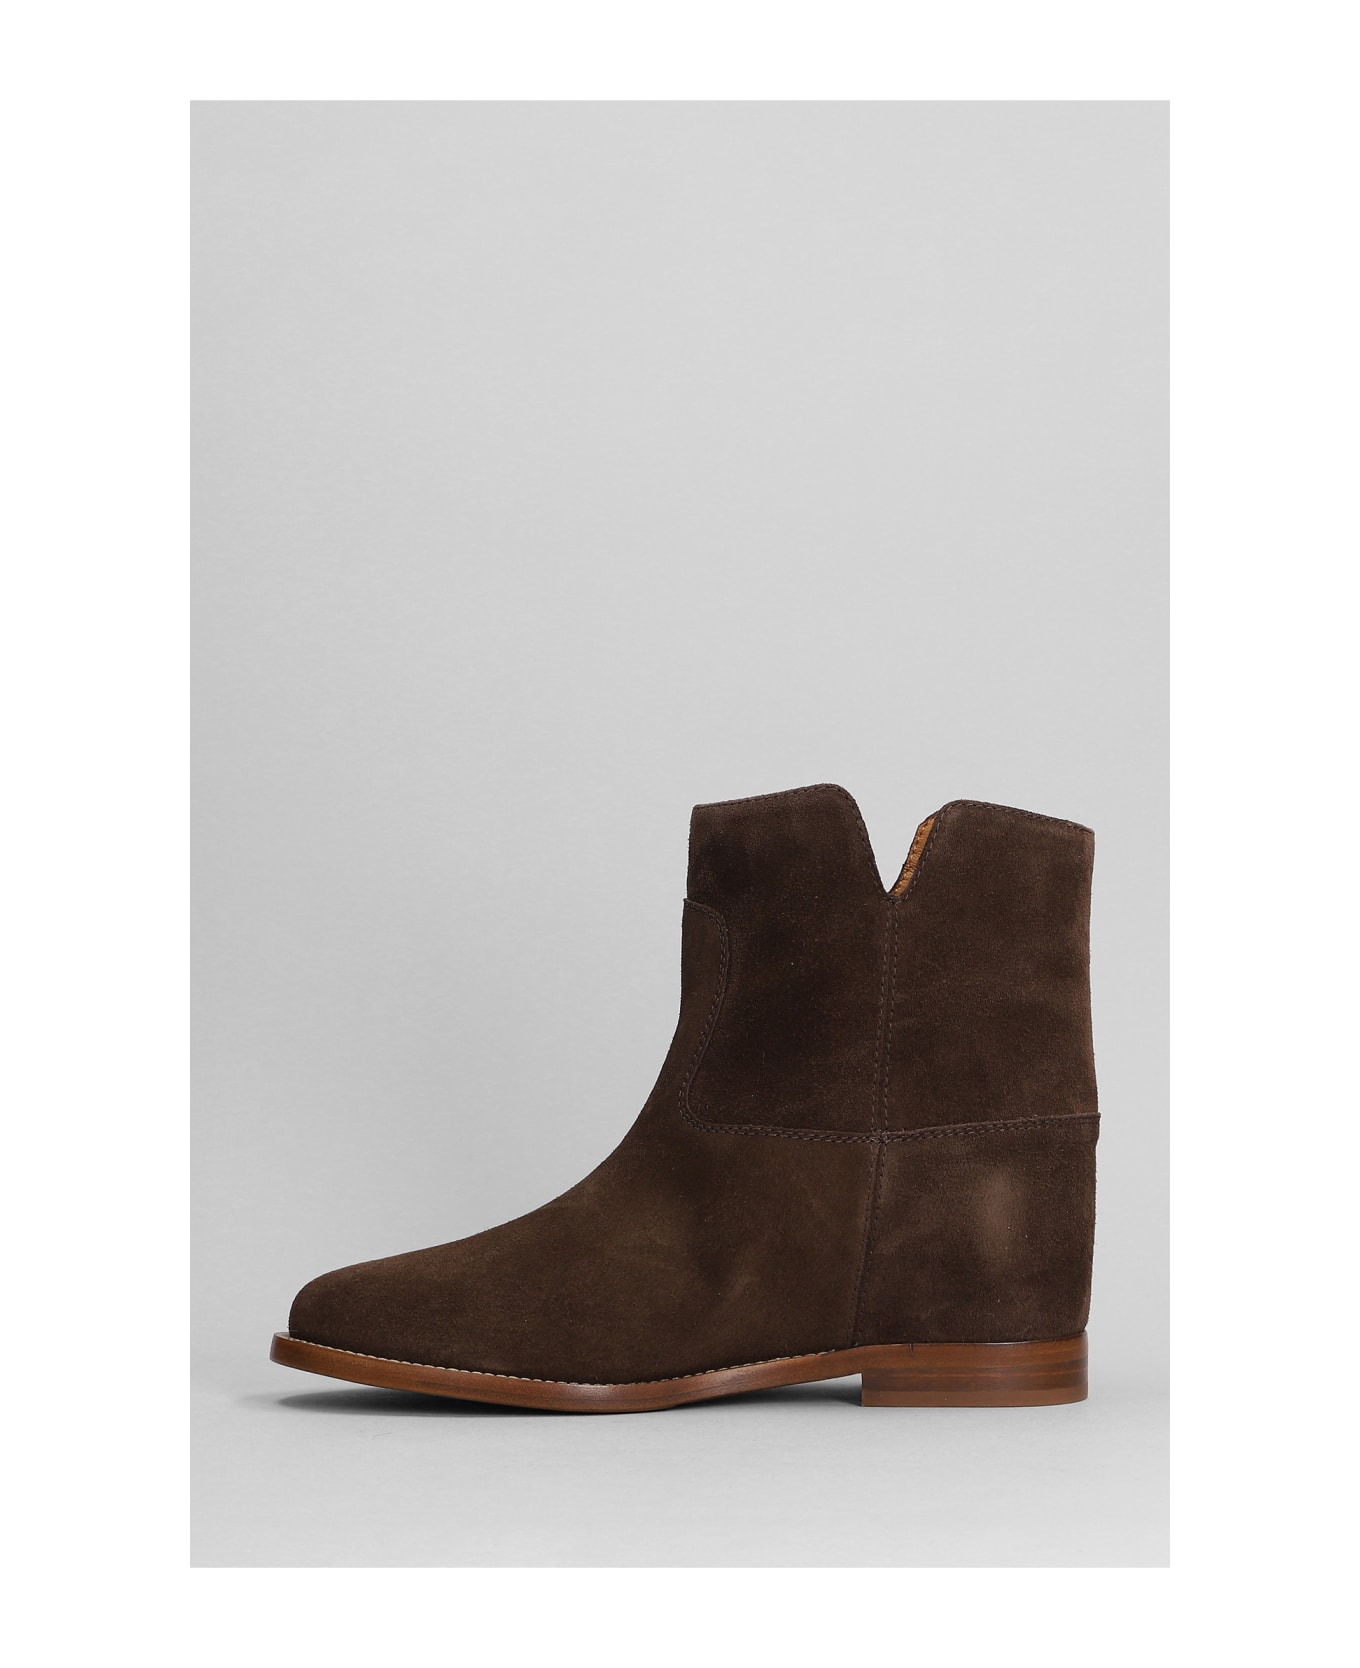 Via Roma 15 Ankle Boots Inside Wedge In Brown Suede - brown